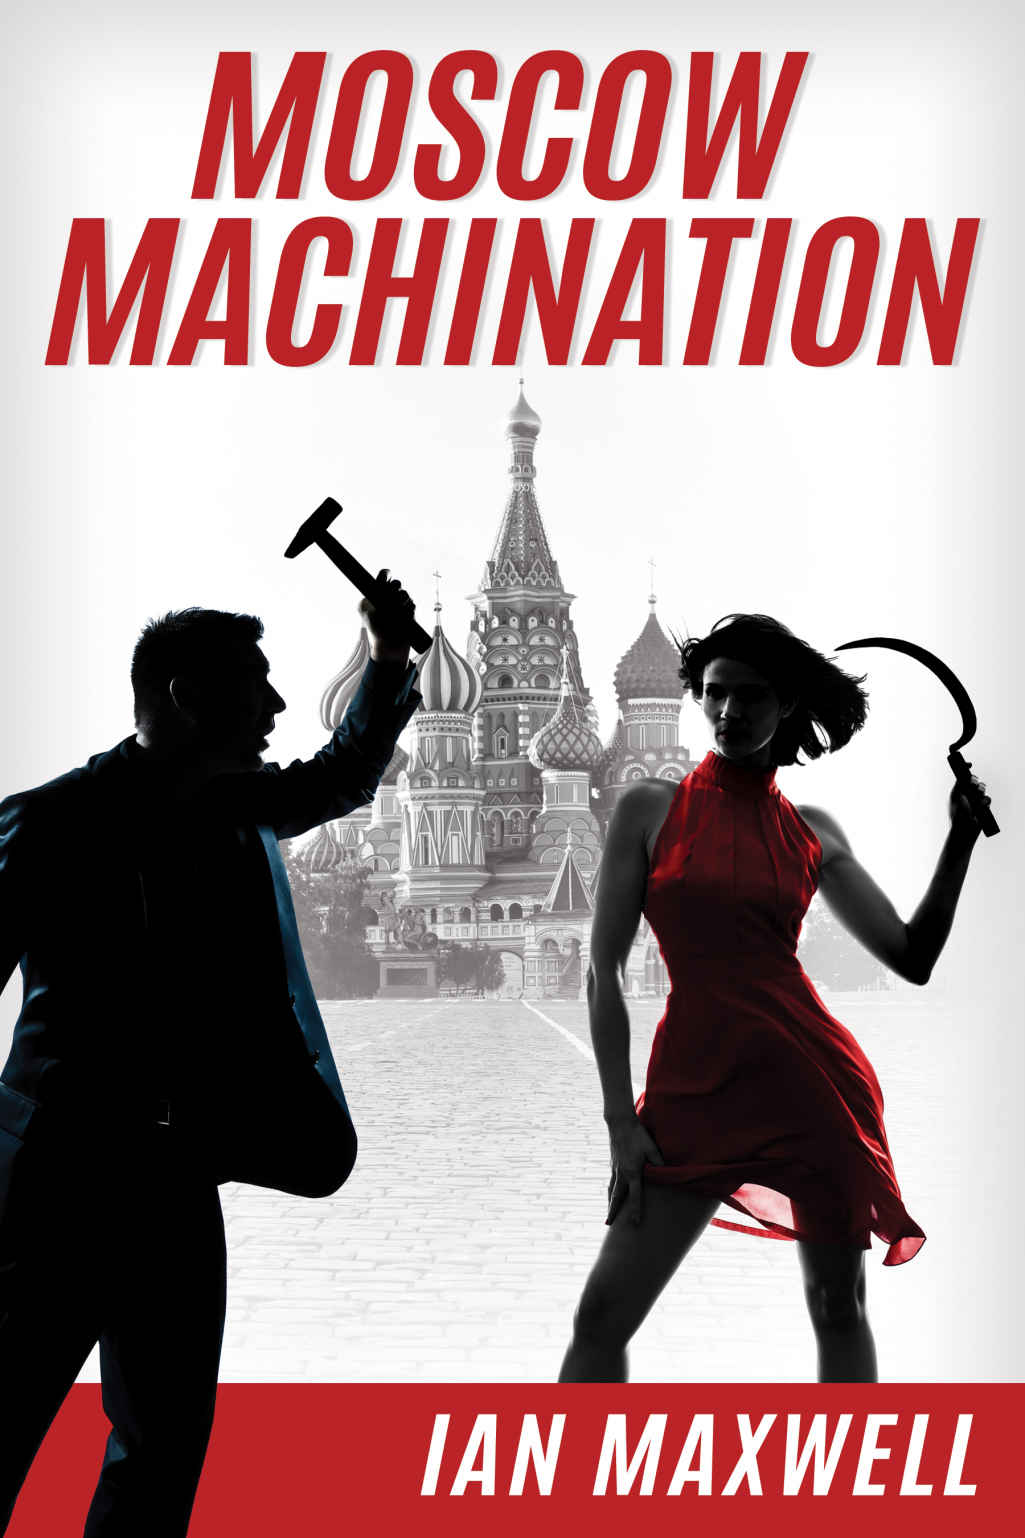 Moscow Machination by Ian Maxwell